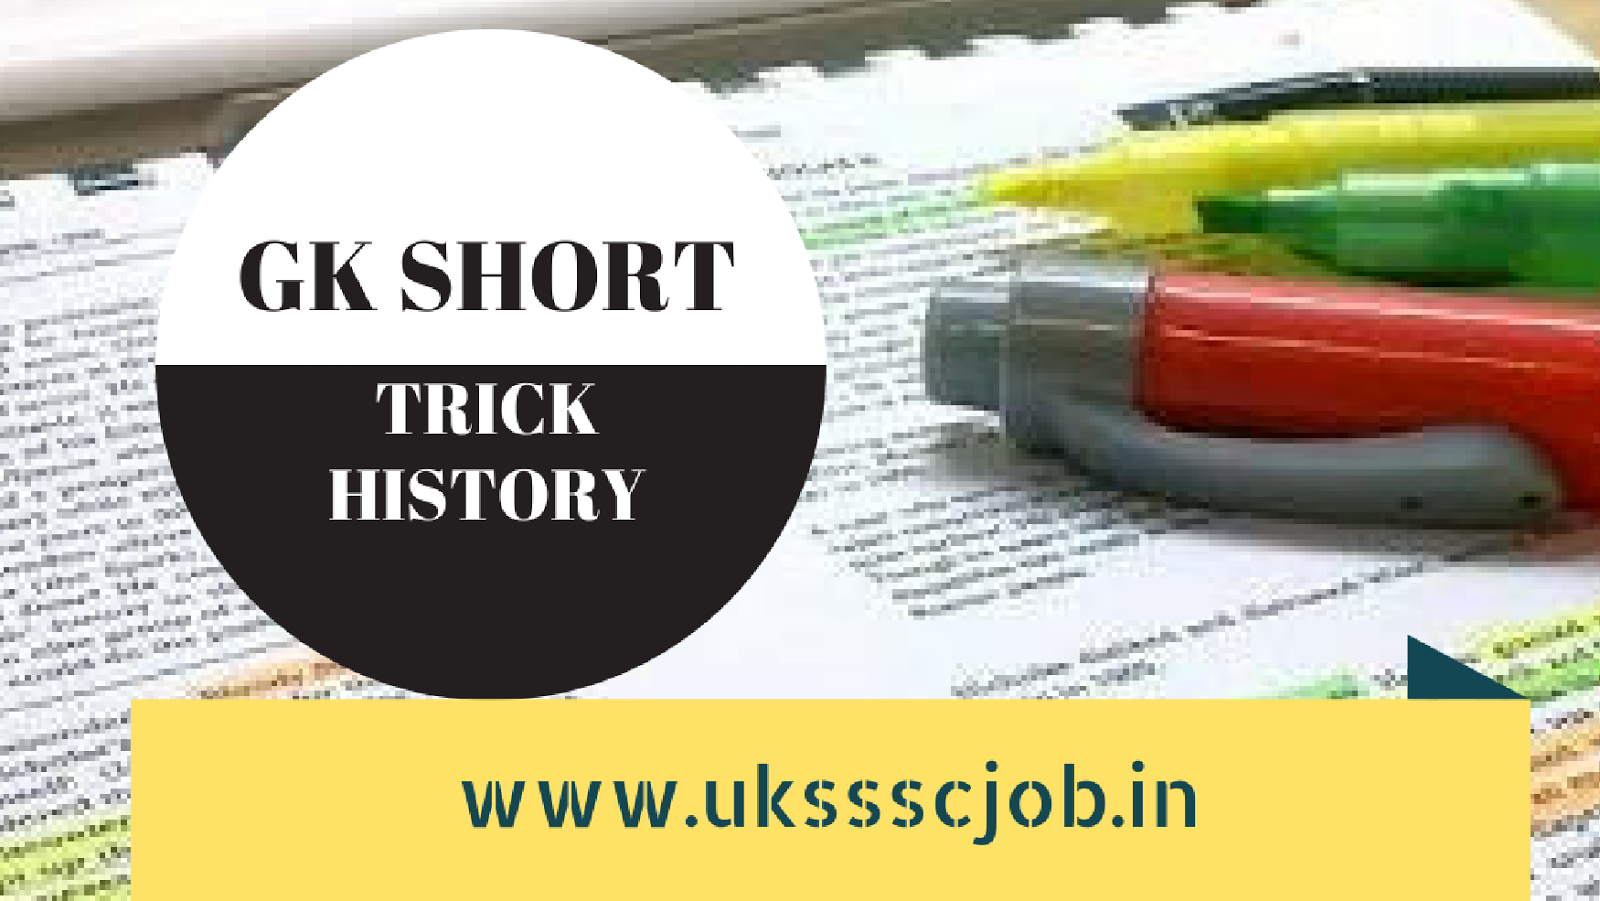 General Knowledge Gk Short Trick For History In Hindi